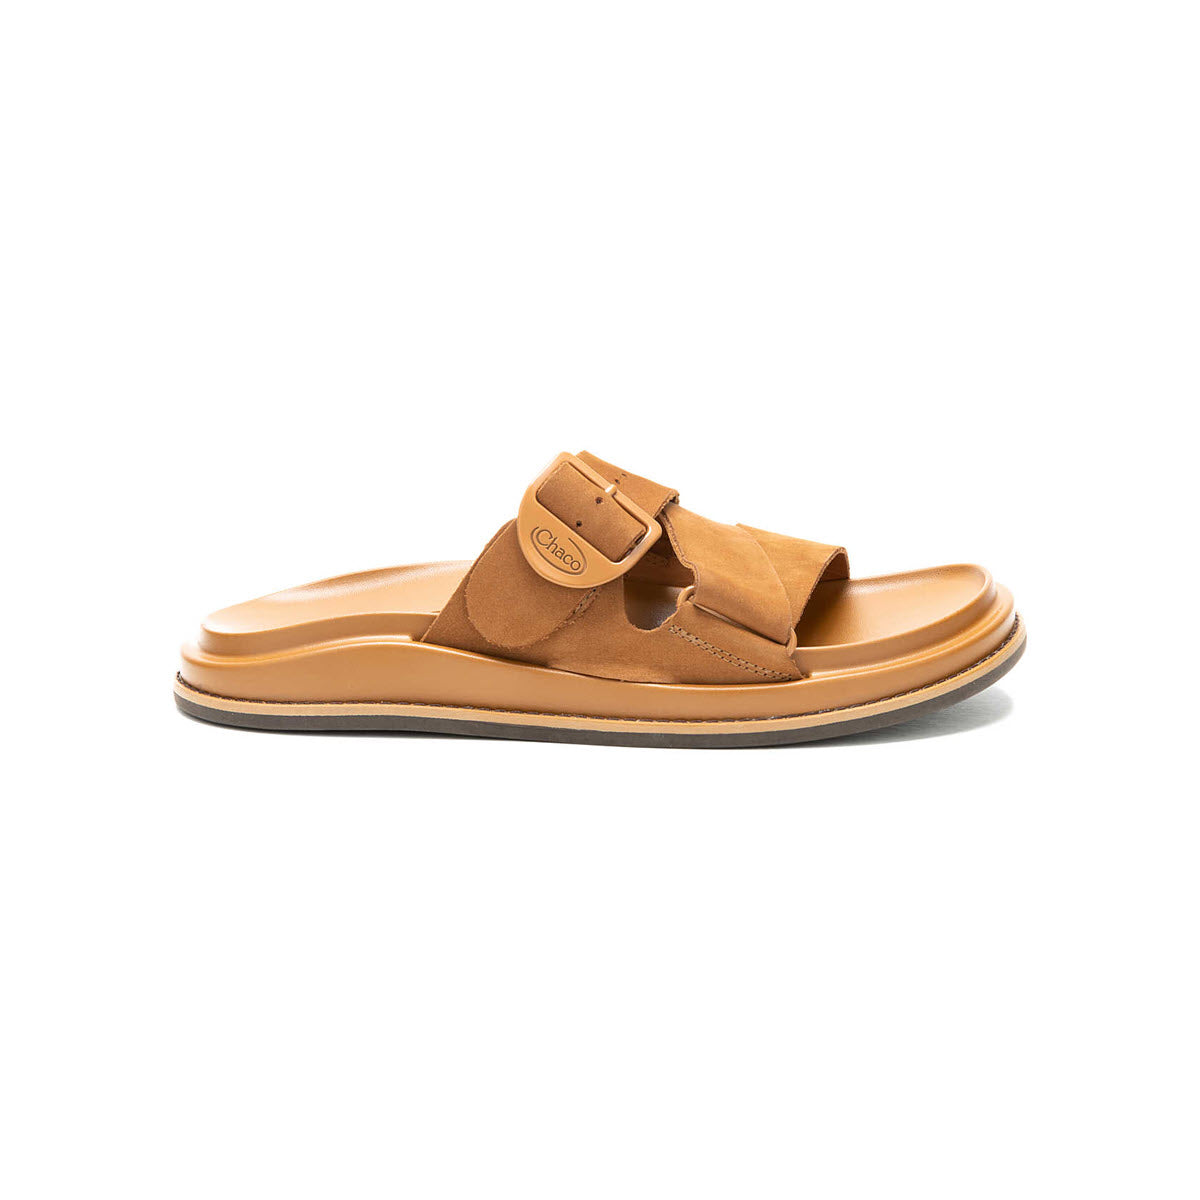 A single tan leather Chaco Townes Slide Cashew sandal with an adjustable strap, displayed on a white background.